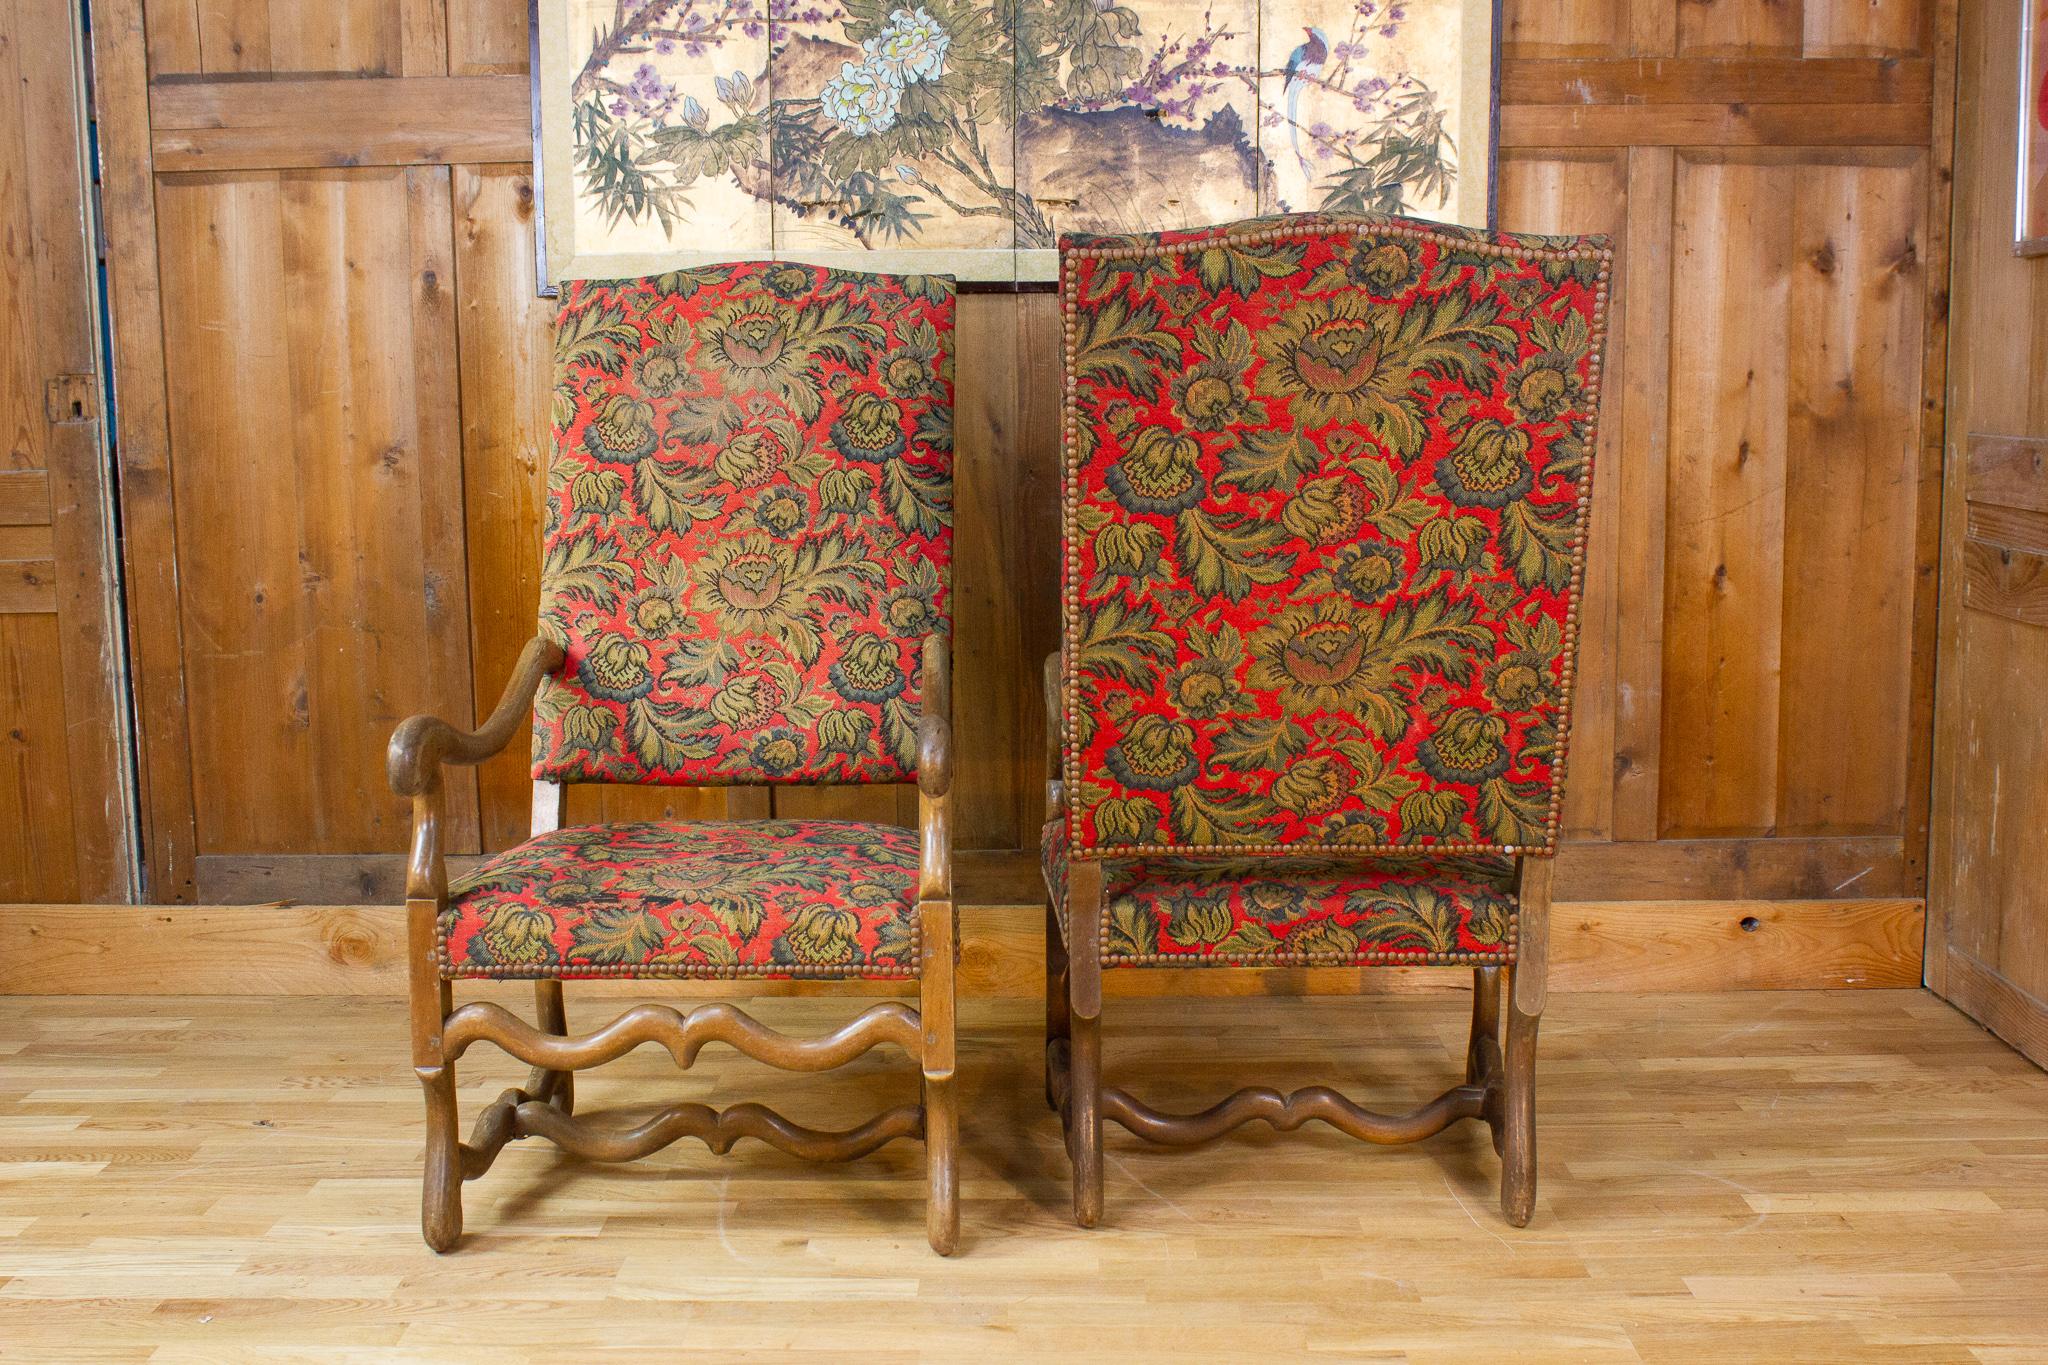 Nice pair of Louis 14 style armchairs dating from the 19th century.
Very beautiful pair of Louis XIII style armchairs, with high backs.
Each armchair rests on four legs connected together by a so-called “sheep bone” crotch.
Large backrests provide